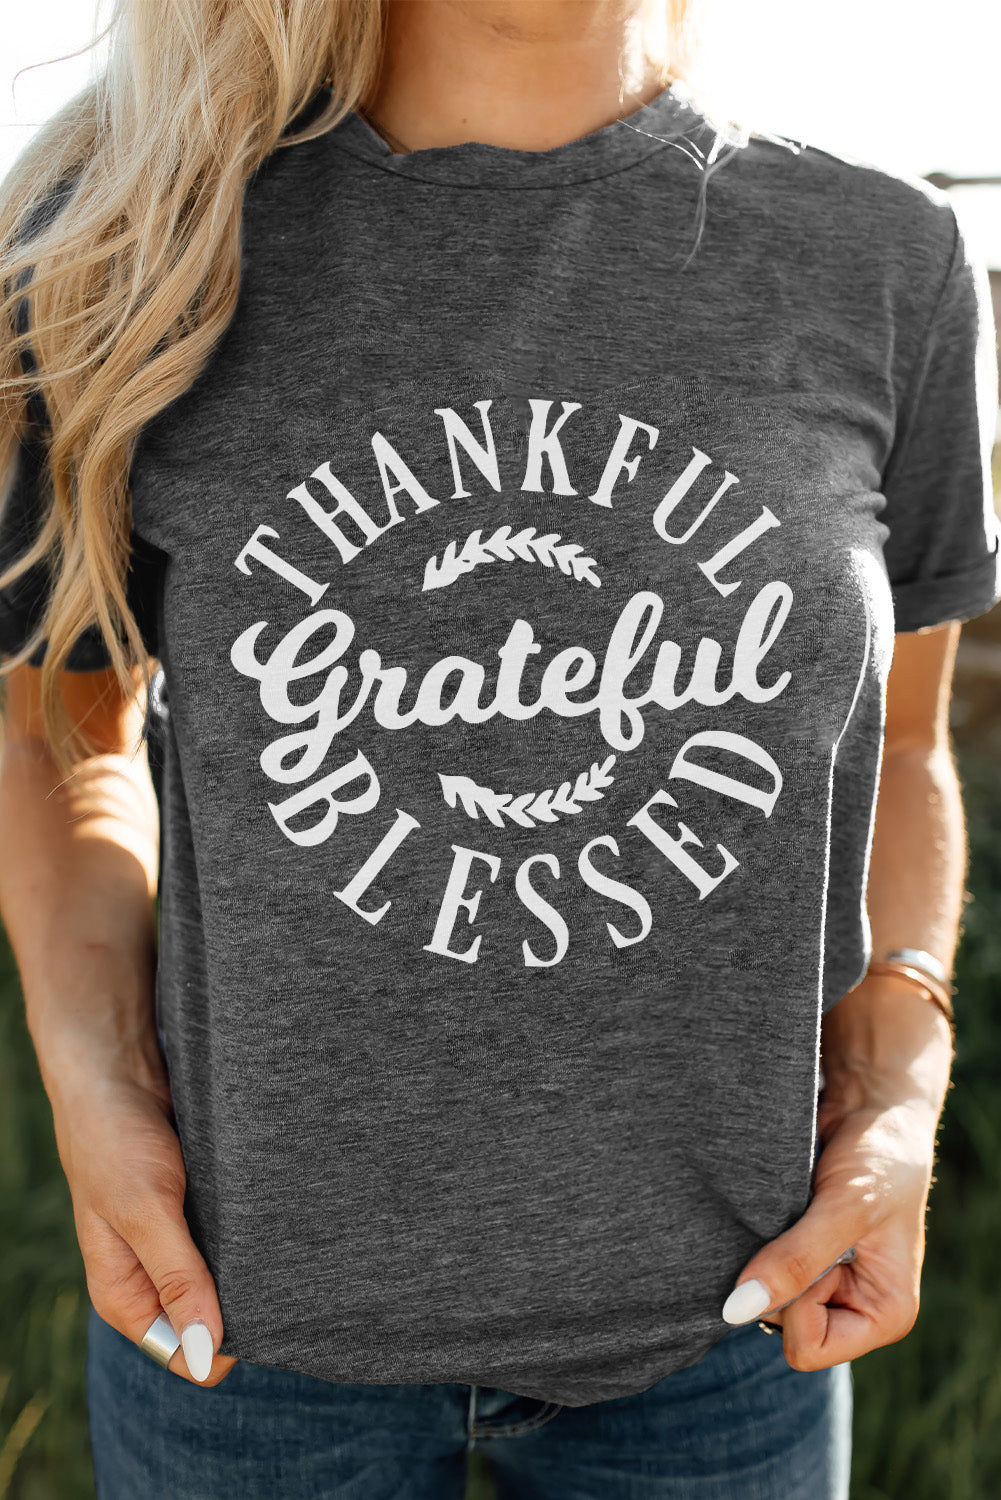 THANKFUL GRATEFUL BLESSED Graphic Crewneck Tee - Kawaii Stop - Casual-Chic Style, Graphic Tee, Gratitude Message, Imported Fashion, Meaningful Apparel, Round Neck, Ship From Overseas, Soft Polyester, Stylish and Comfortable, SYNZ, T-Shirt, T-Shirts, Tee, Women's Clothing, Women's Top